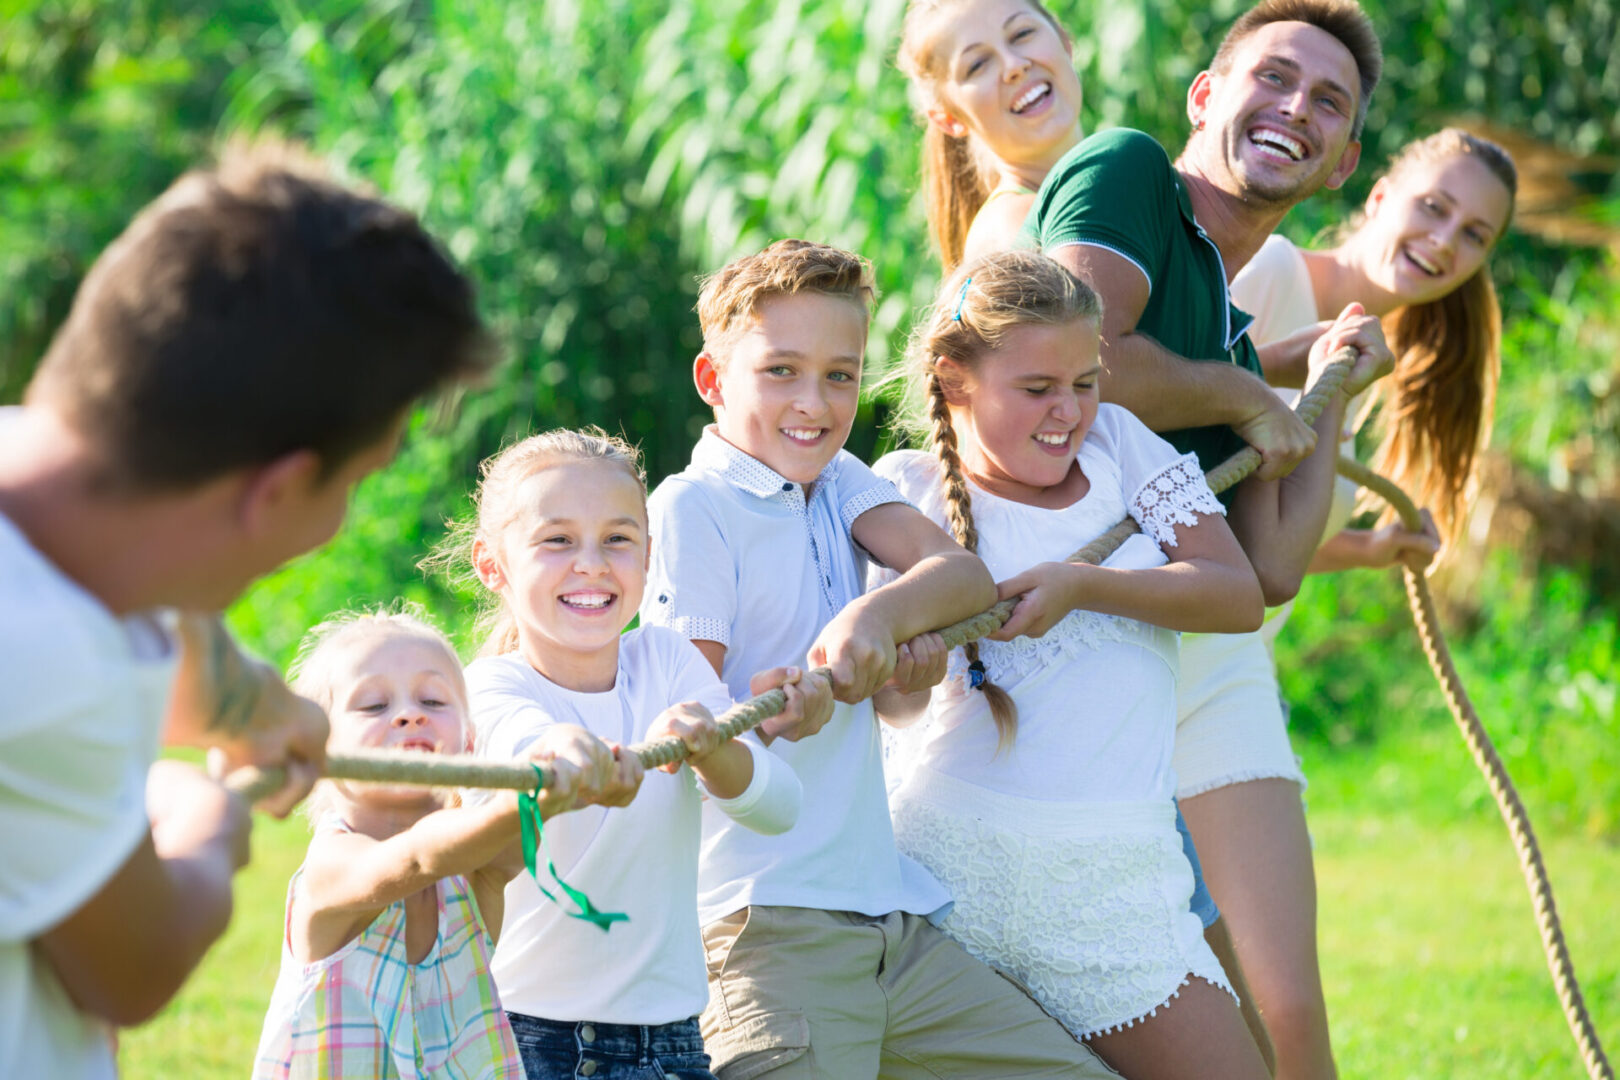 Understanding the Impact of Birth Order and Sibling Relationships on Romantic Relationships